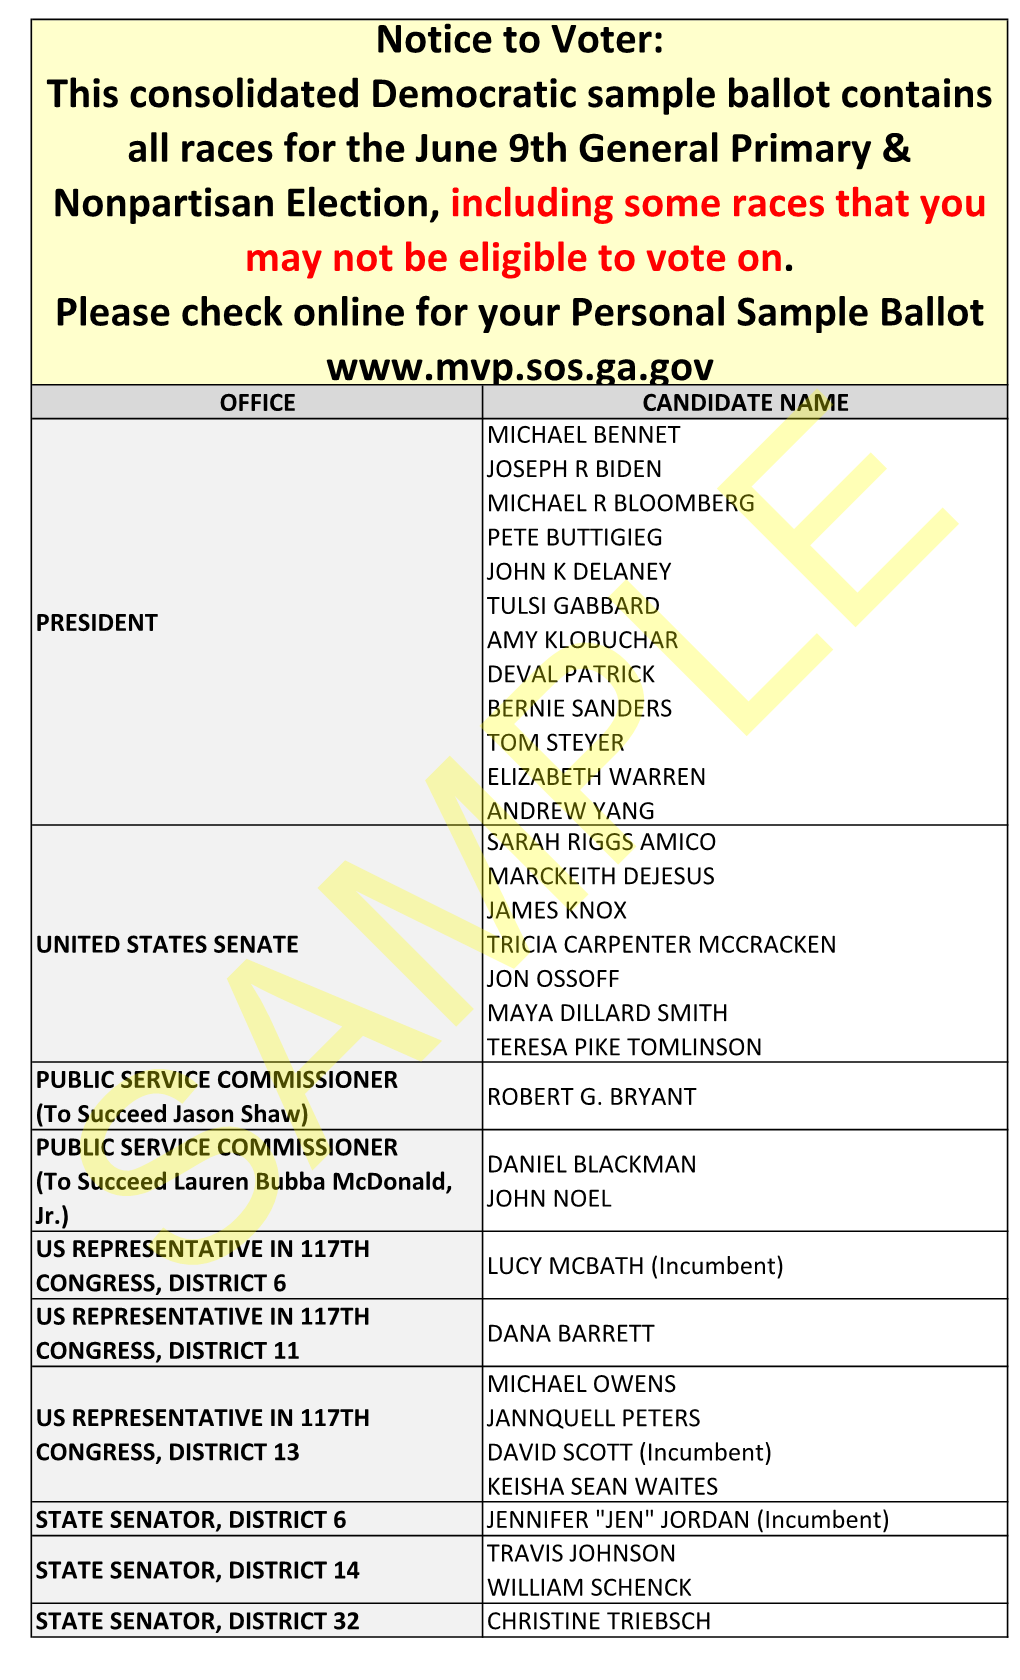 This Consolidated Democratic Sample Ballot Contains All Races For